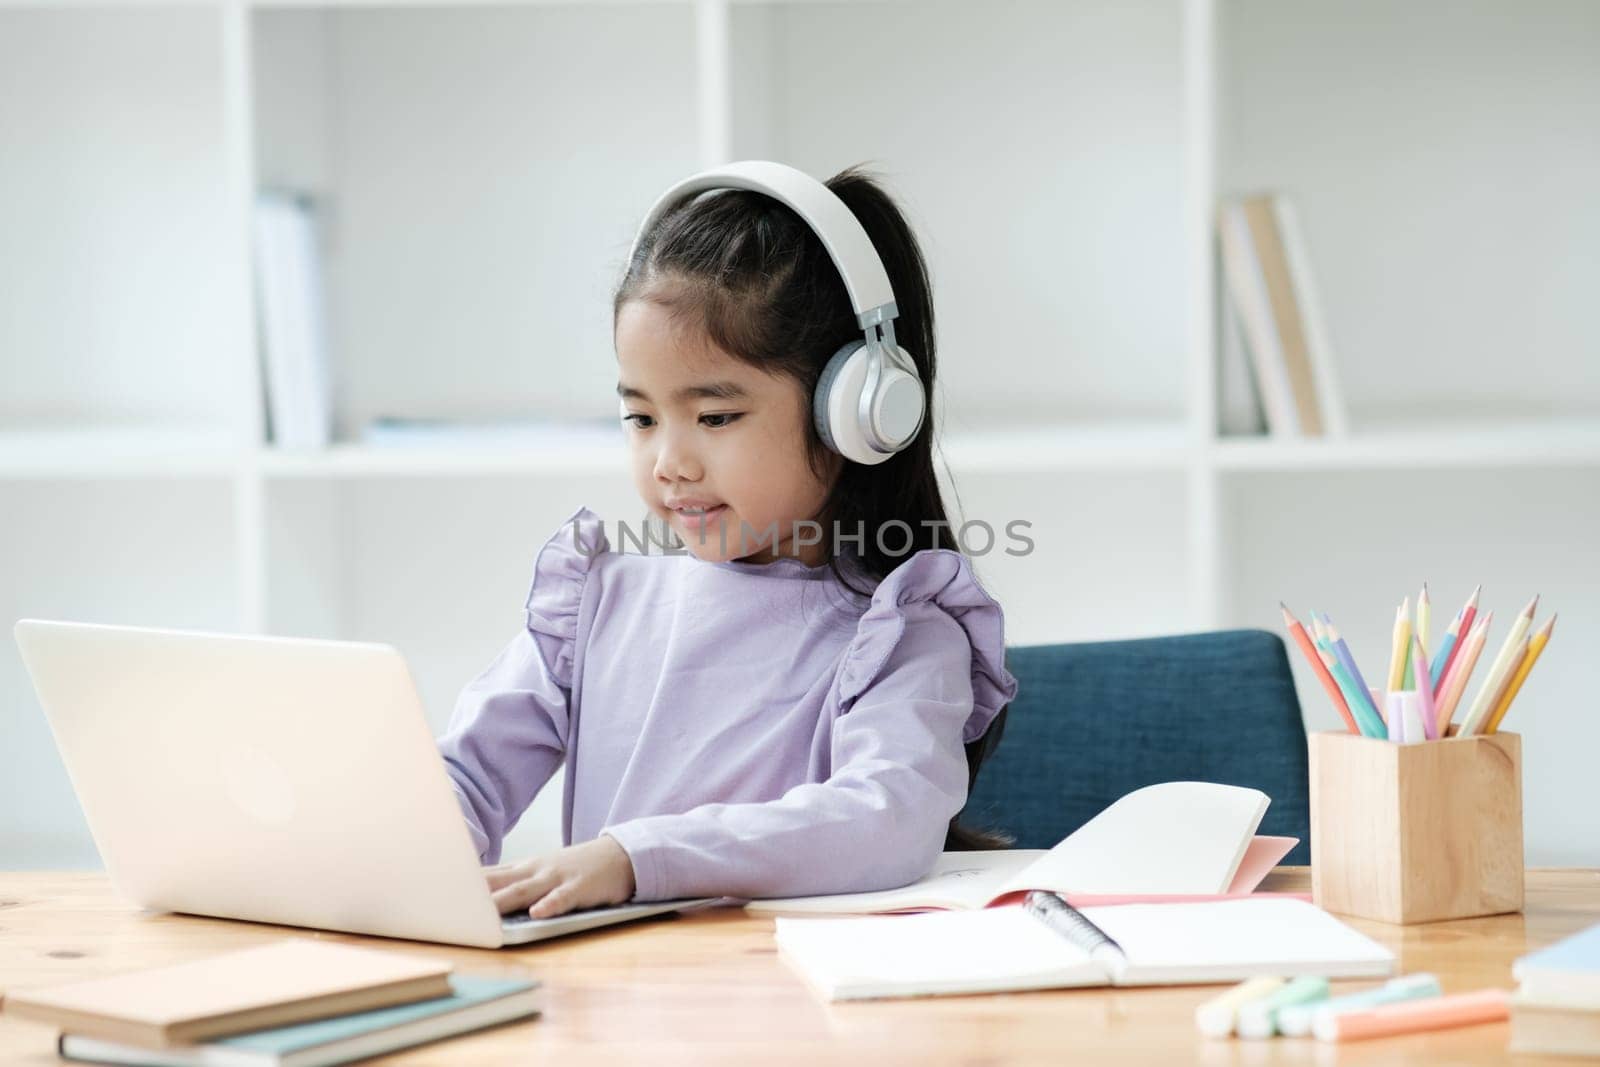 A young girl is sitting at a desk with a laptop and headphones on. She is focused on her work and she is enjoying herself